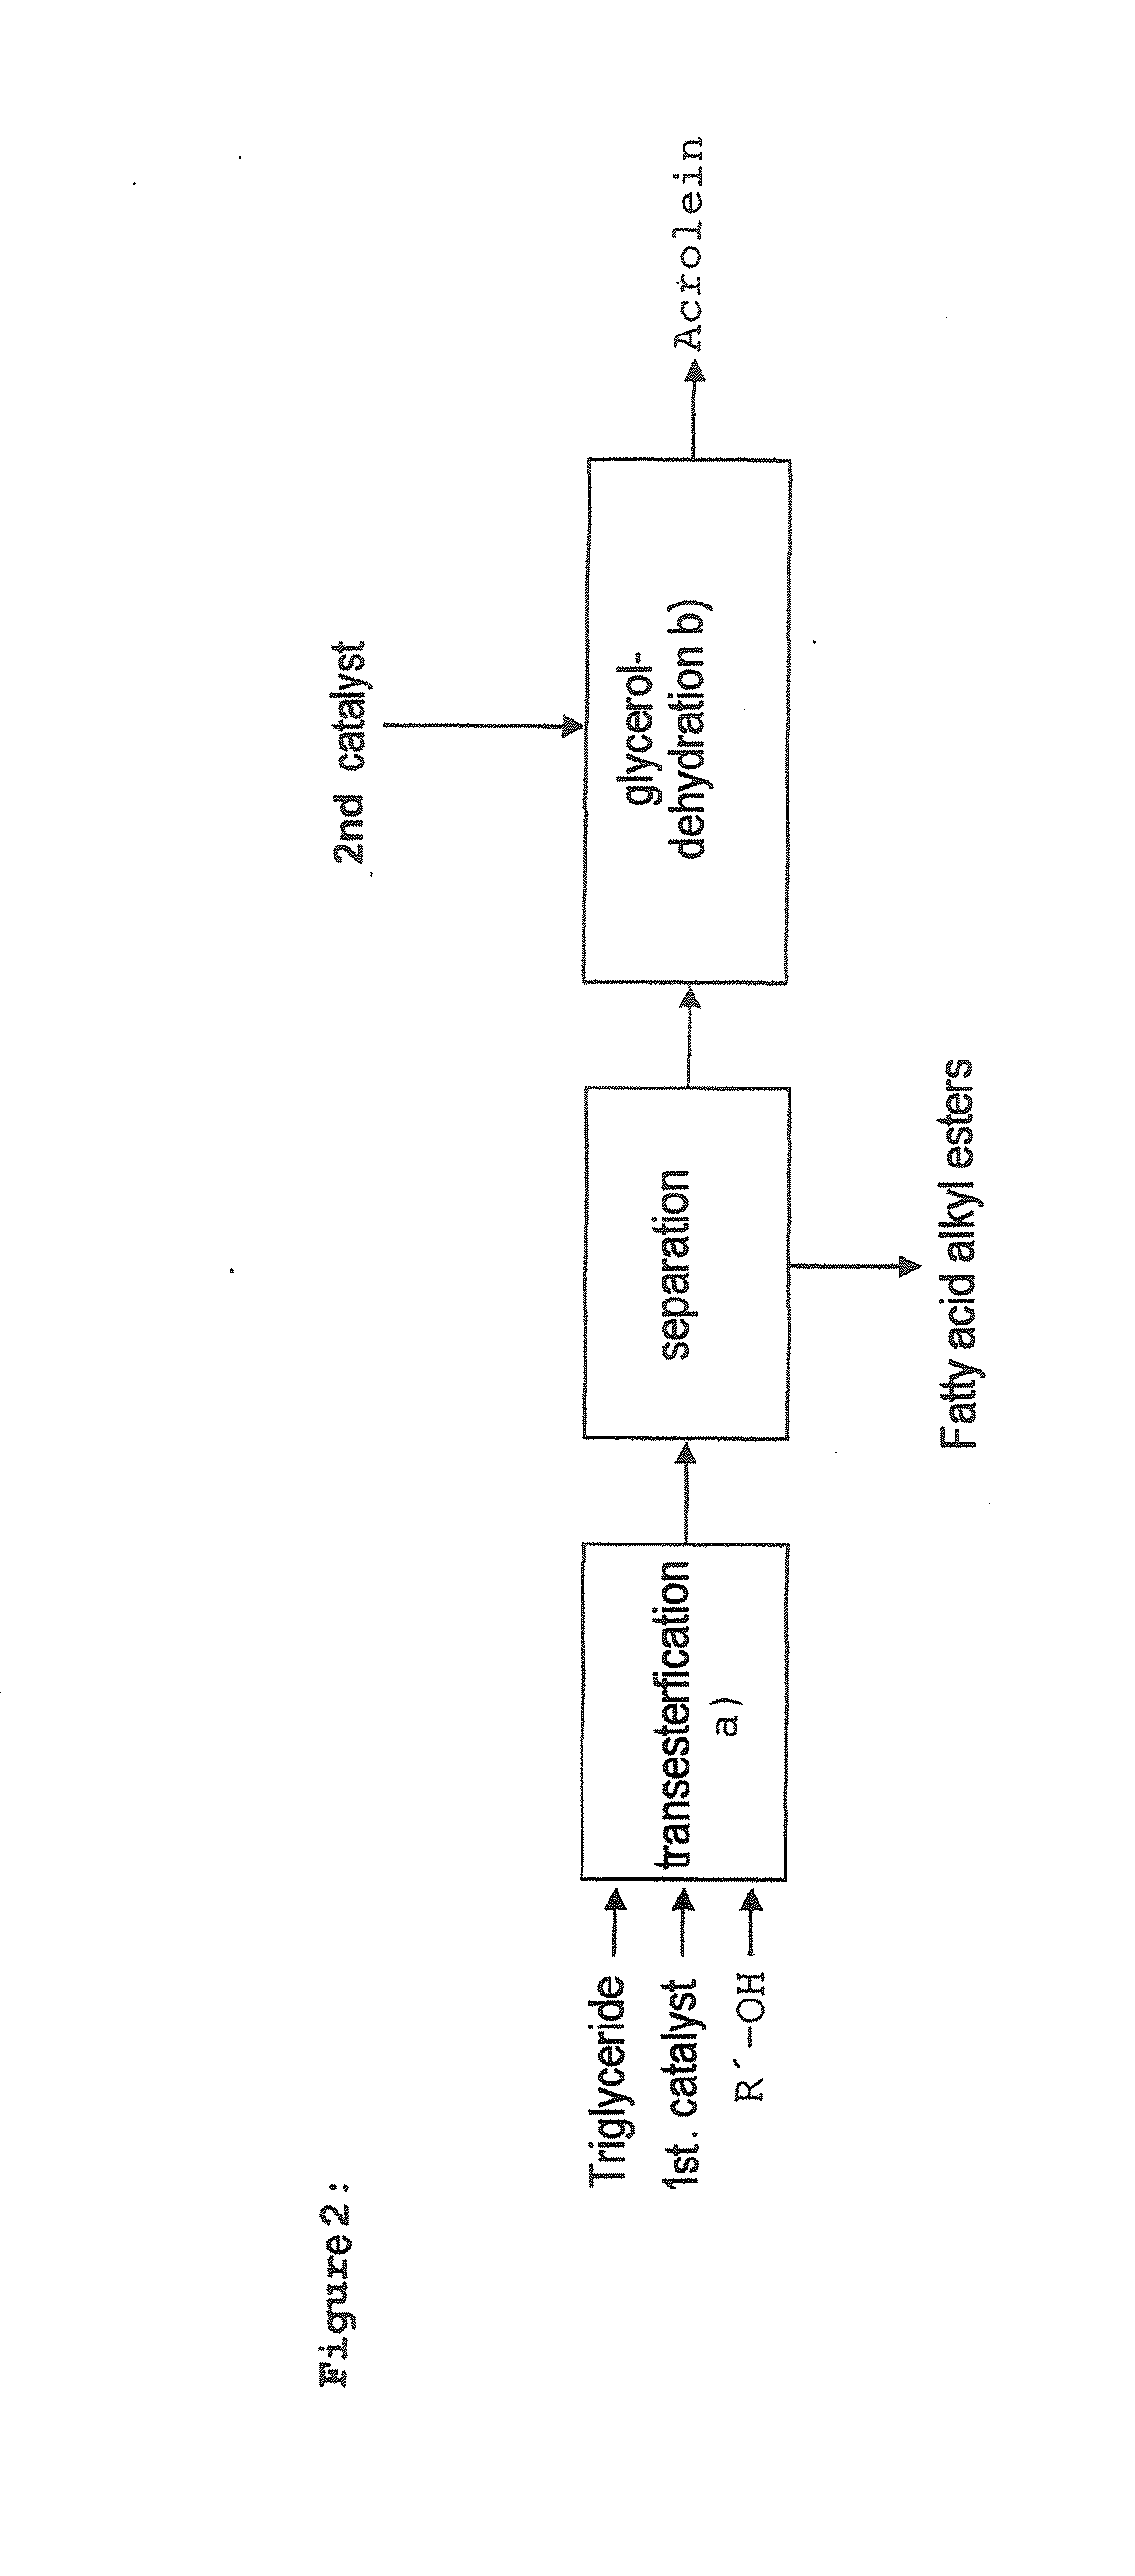 Process for preparing fatty acid alkyl esters and acrolein from triglycerides